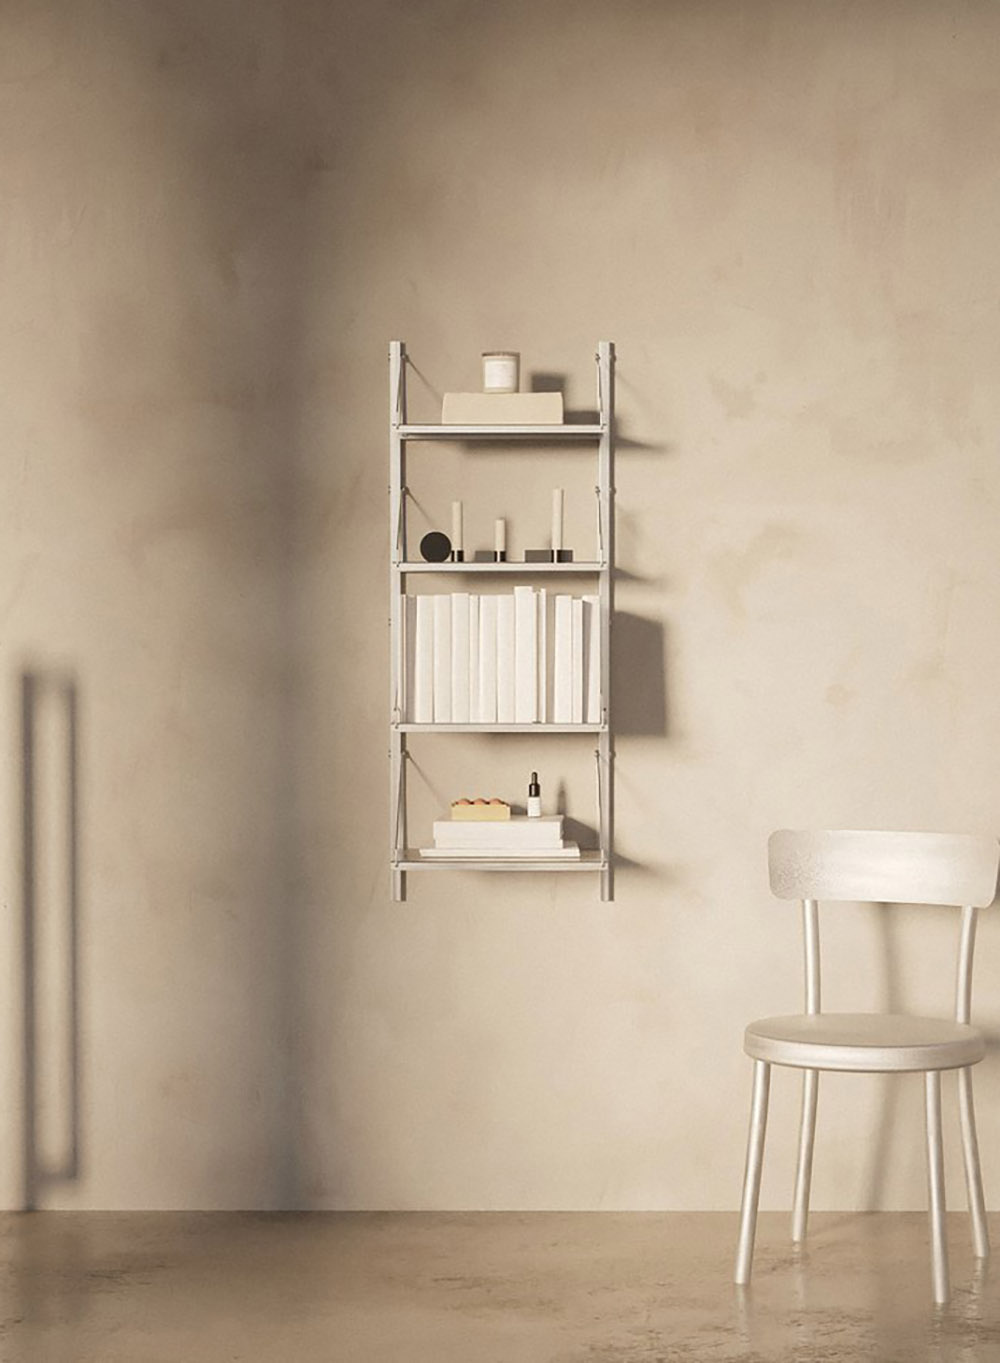 Shelf Library Stainless Steel | W40 Section H108,4 cm